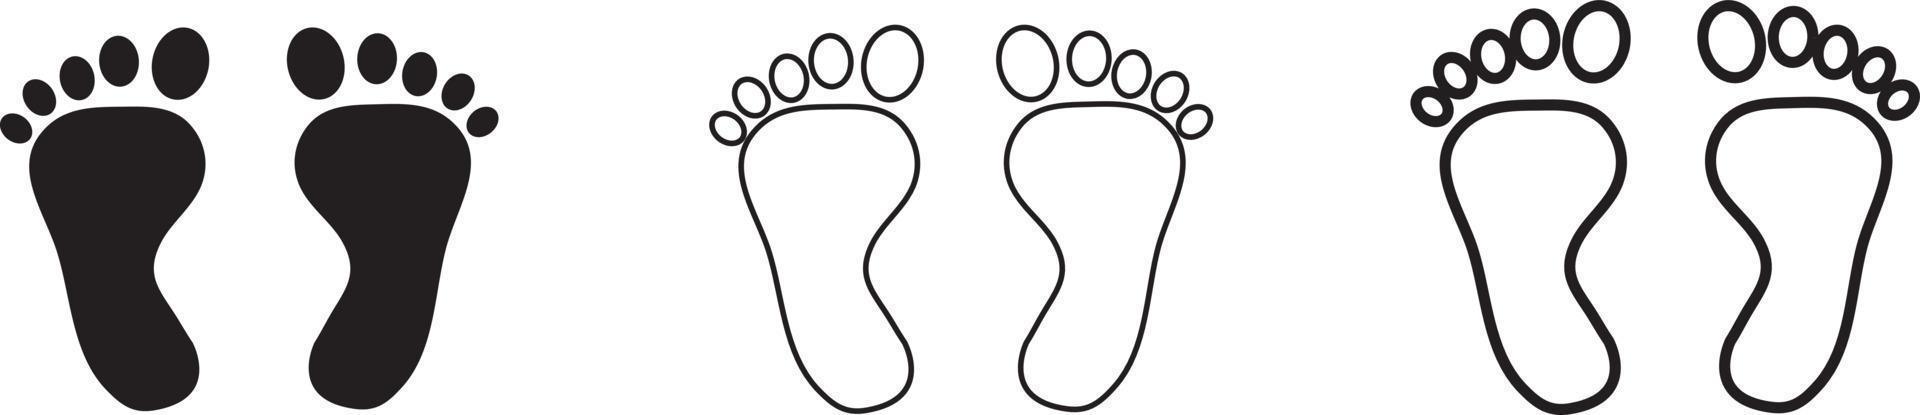 Vector icon illustration material of foot, footprint, sole